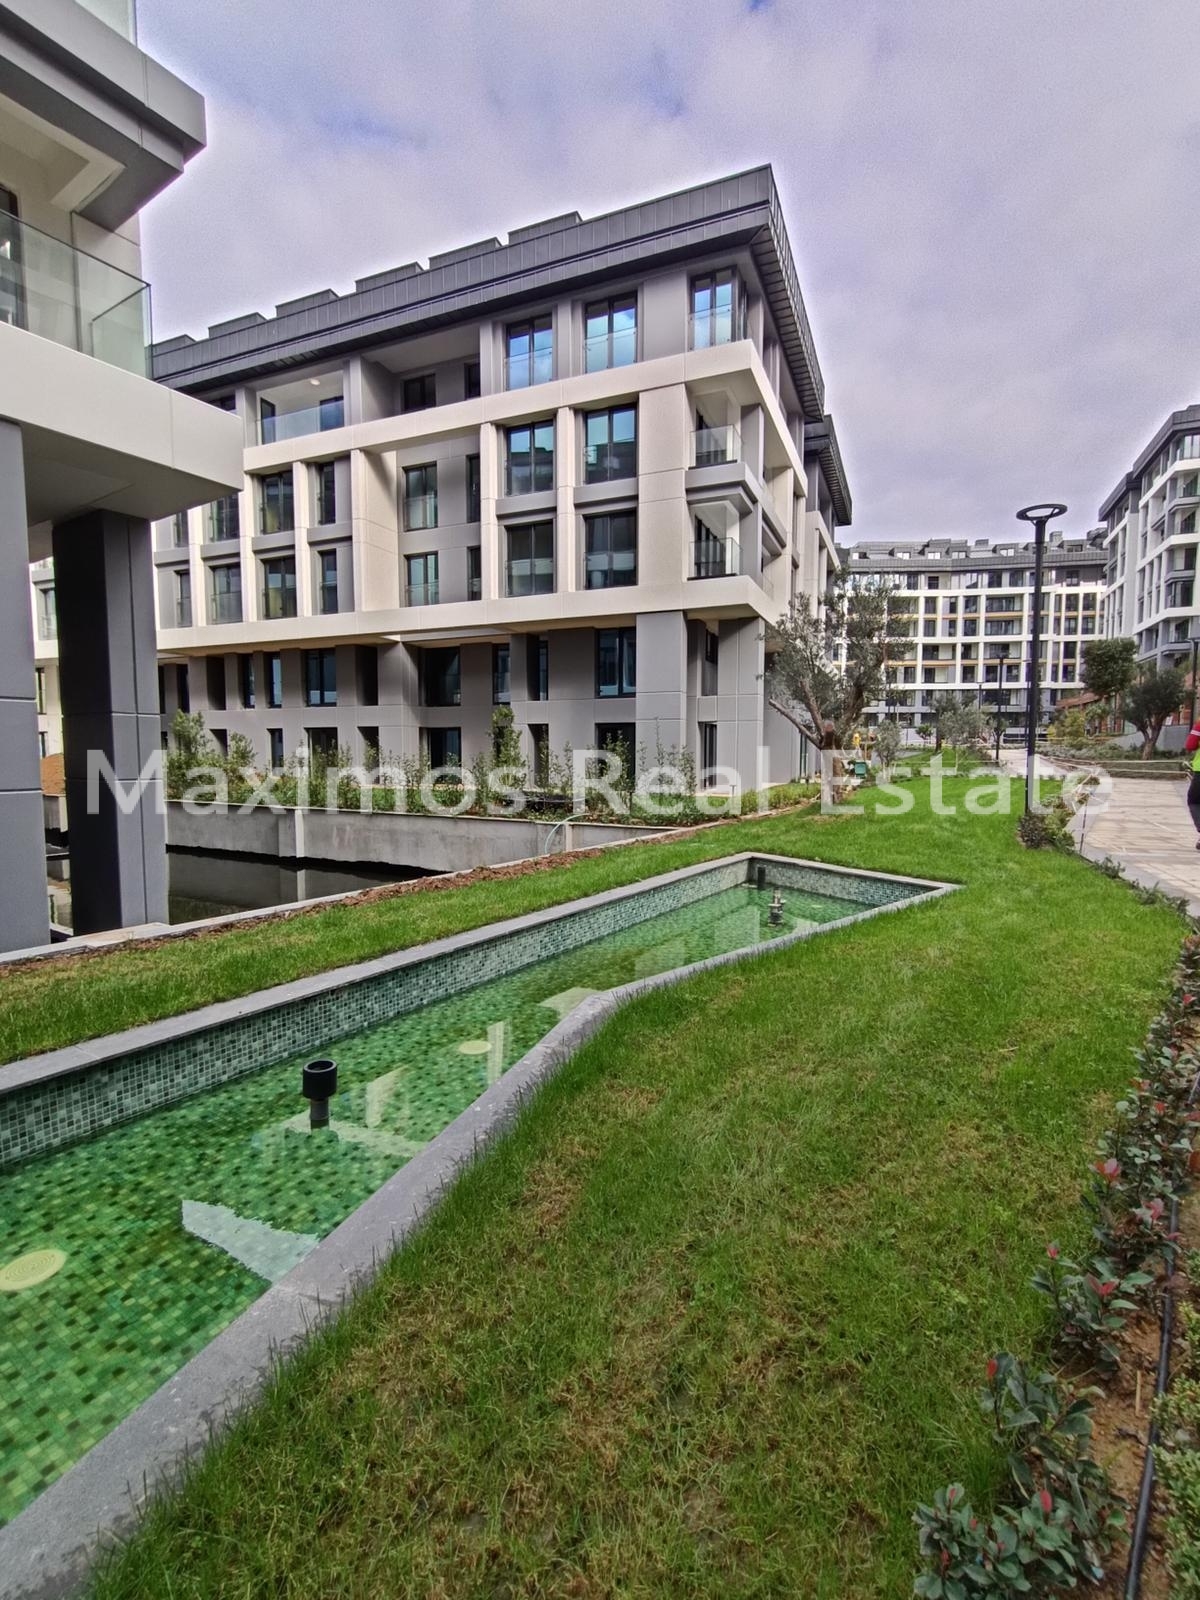 Apartments for Sale in Uskudar photos #1